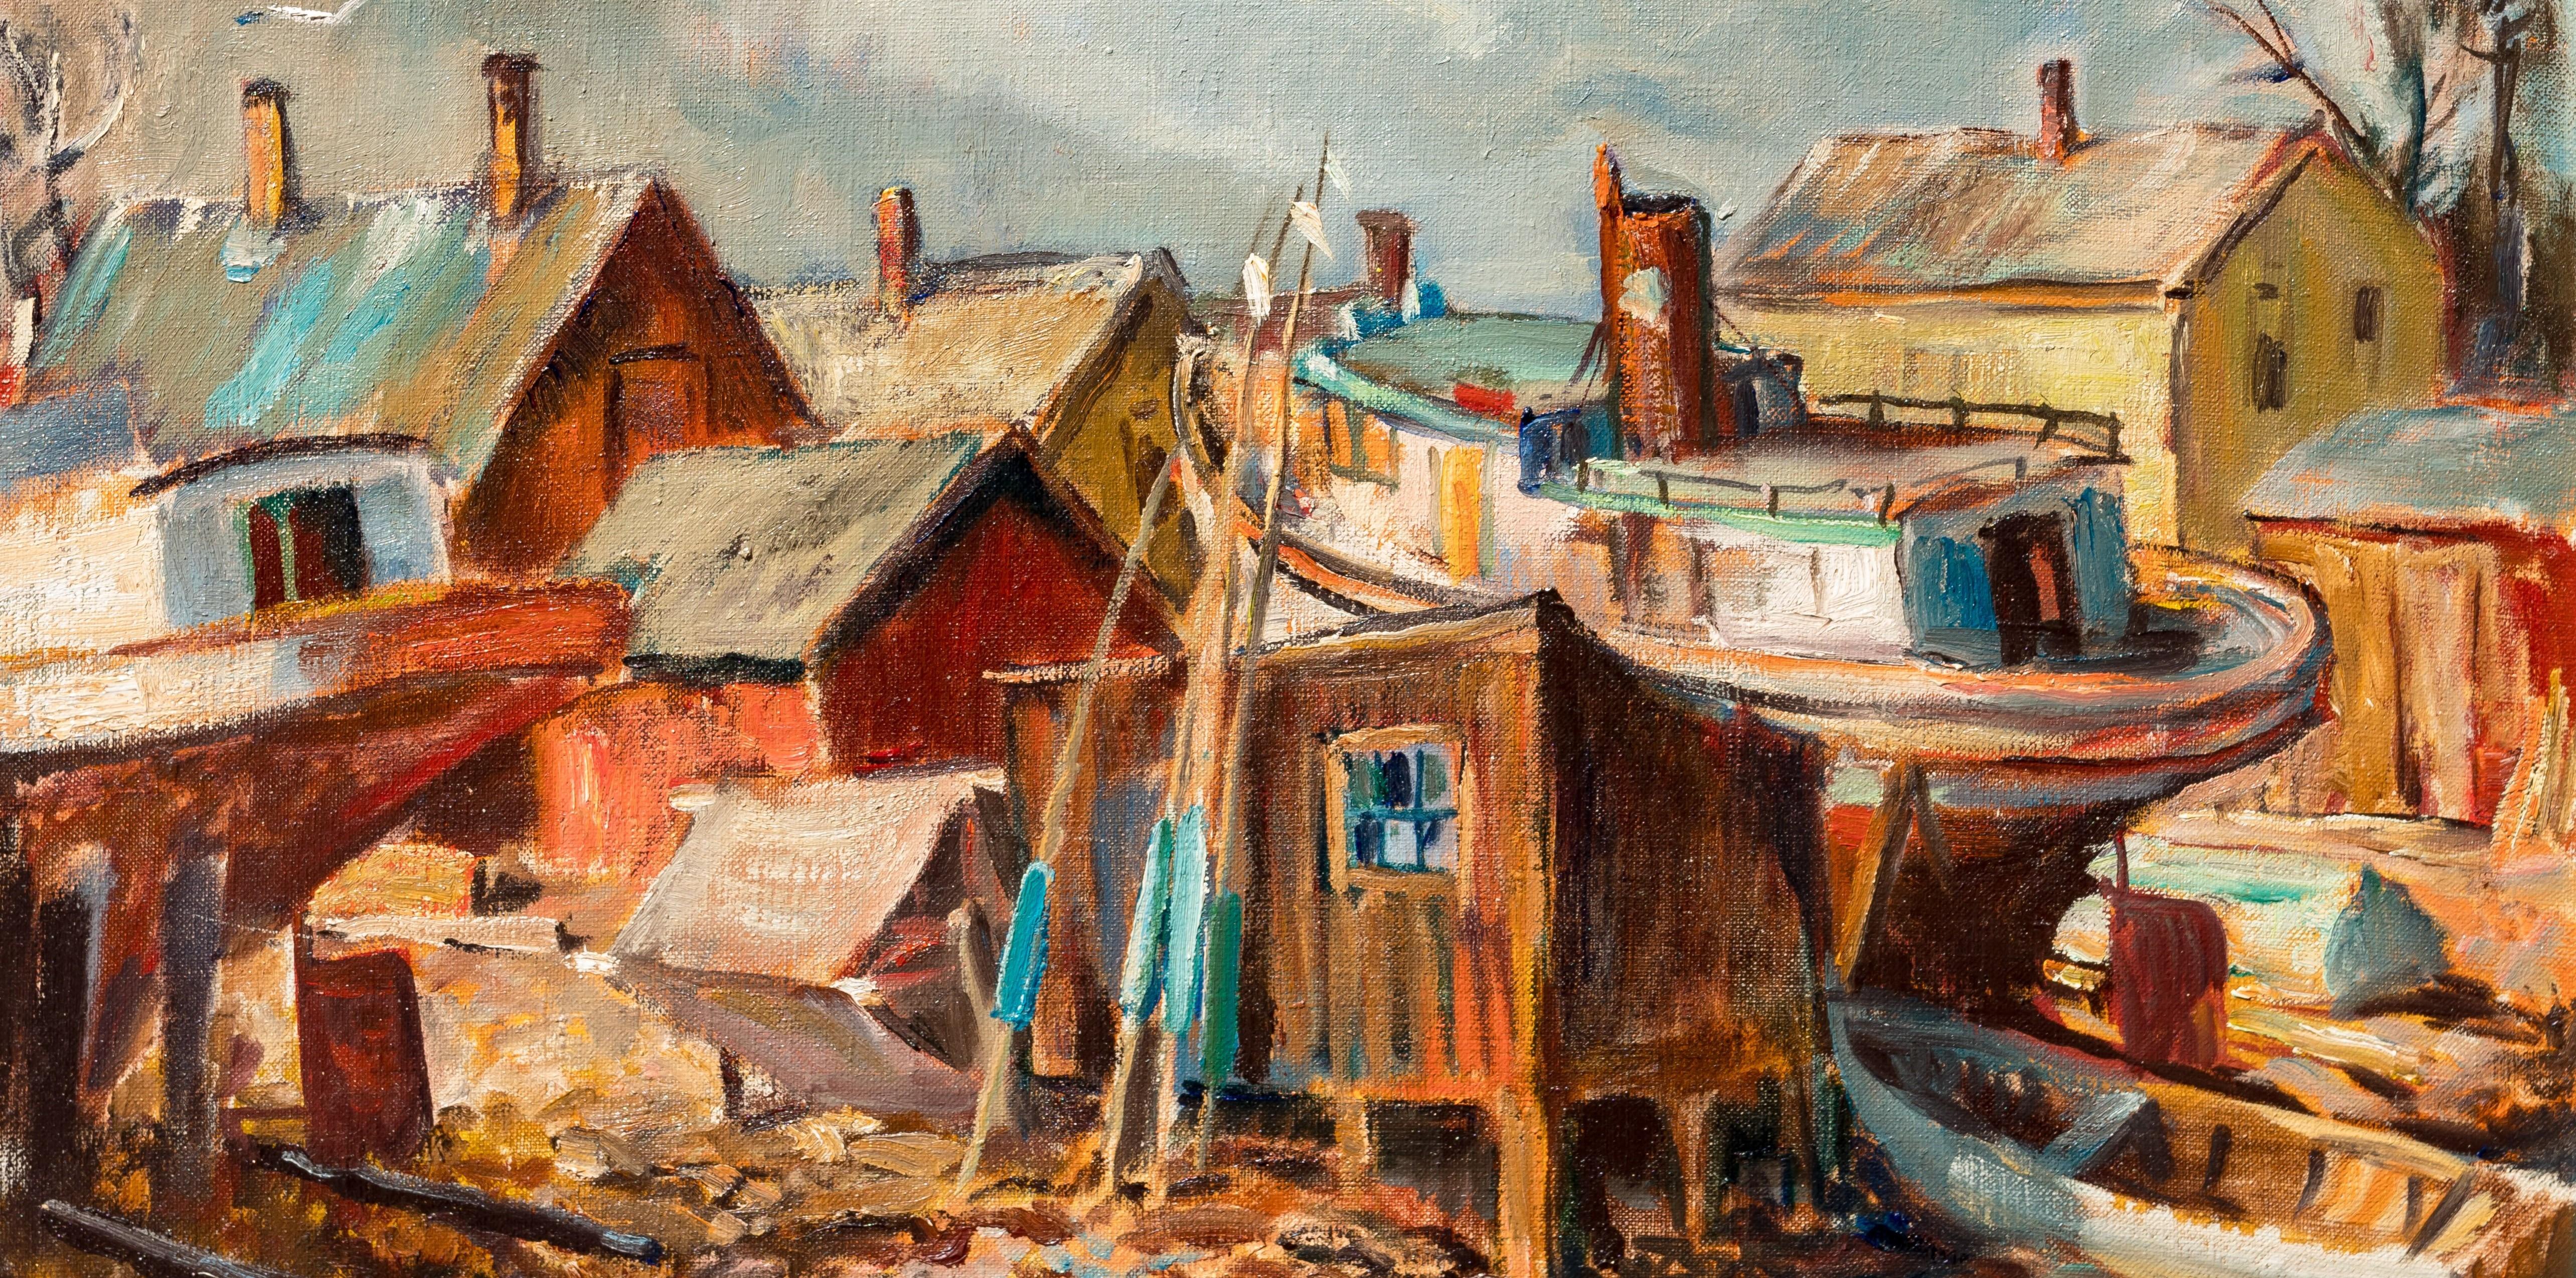 This outstanding and very rare American Regionalist painting (Circa 1940s) by the legendary early Wisconsin artist, Robert von Neumann (American, 1888-1976), depicts the historic fishing cove of Jones Island in old Milwaukee, a favorite painting